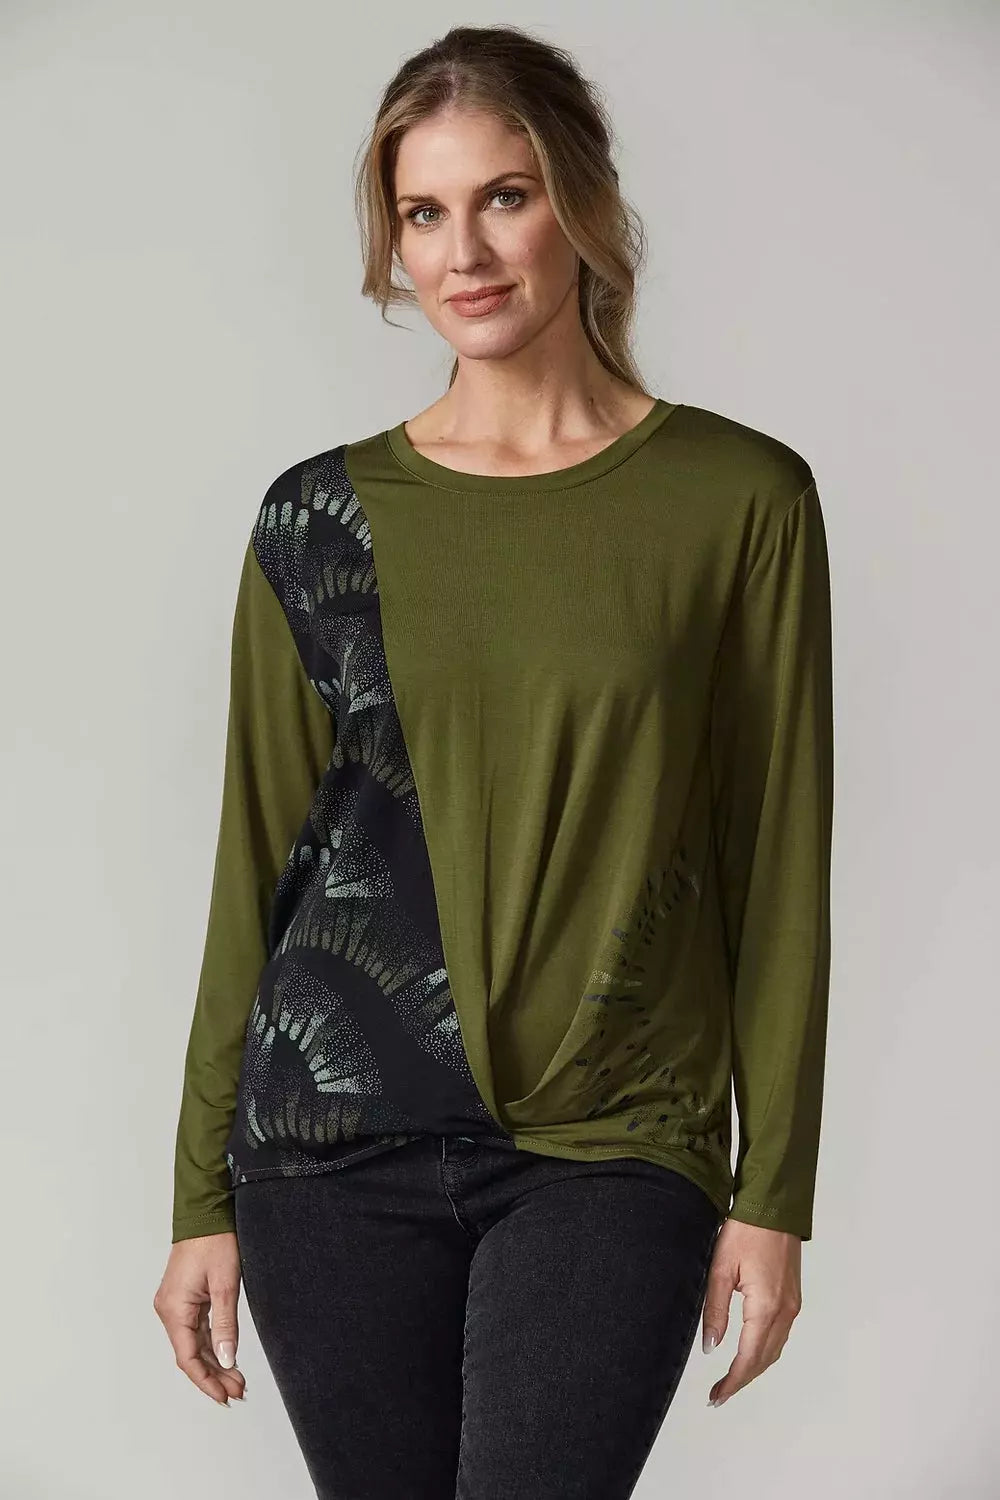 Newport Collection Skylar Top in Olive Scattered Wave Print